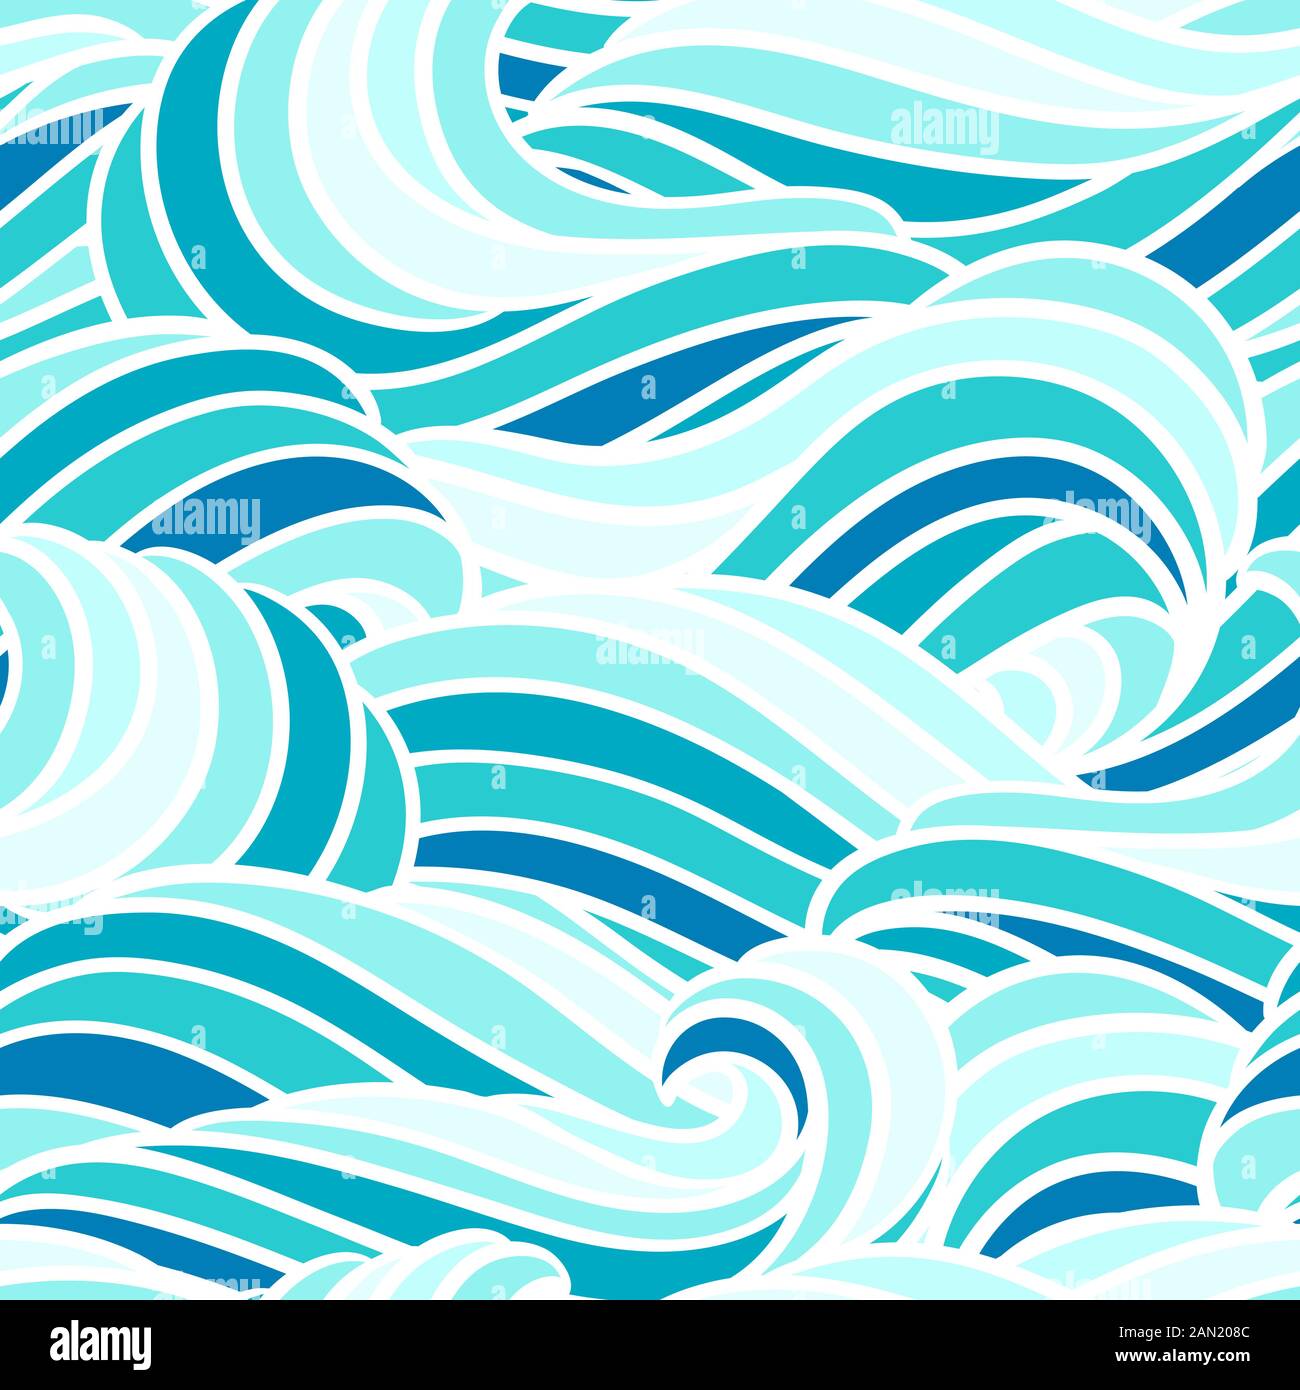 Seamless wave pattern. Background with sea, river or water texture. Stock Vector